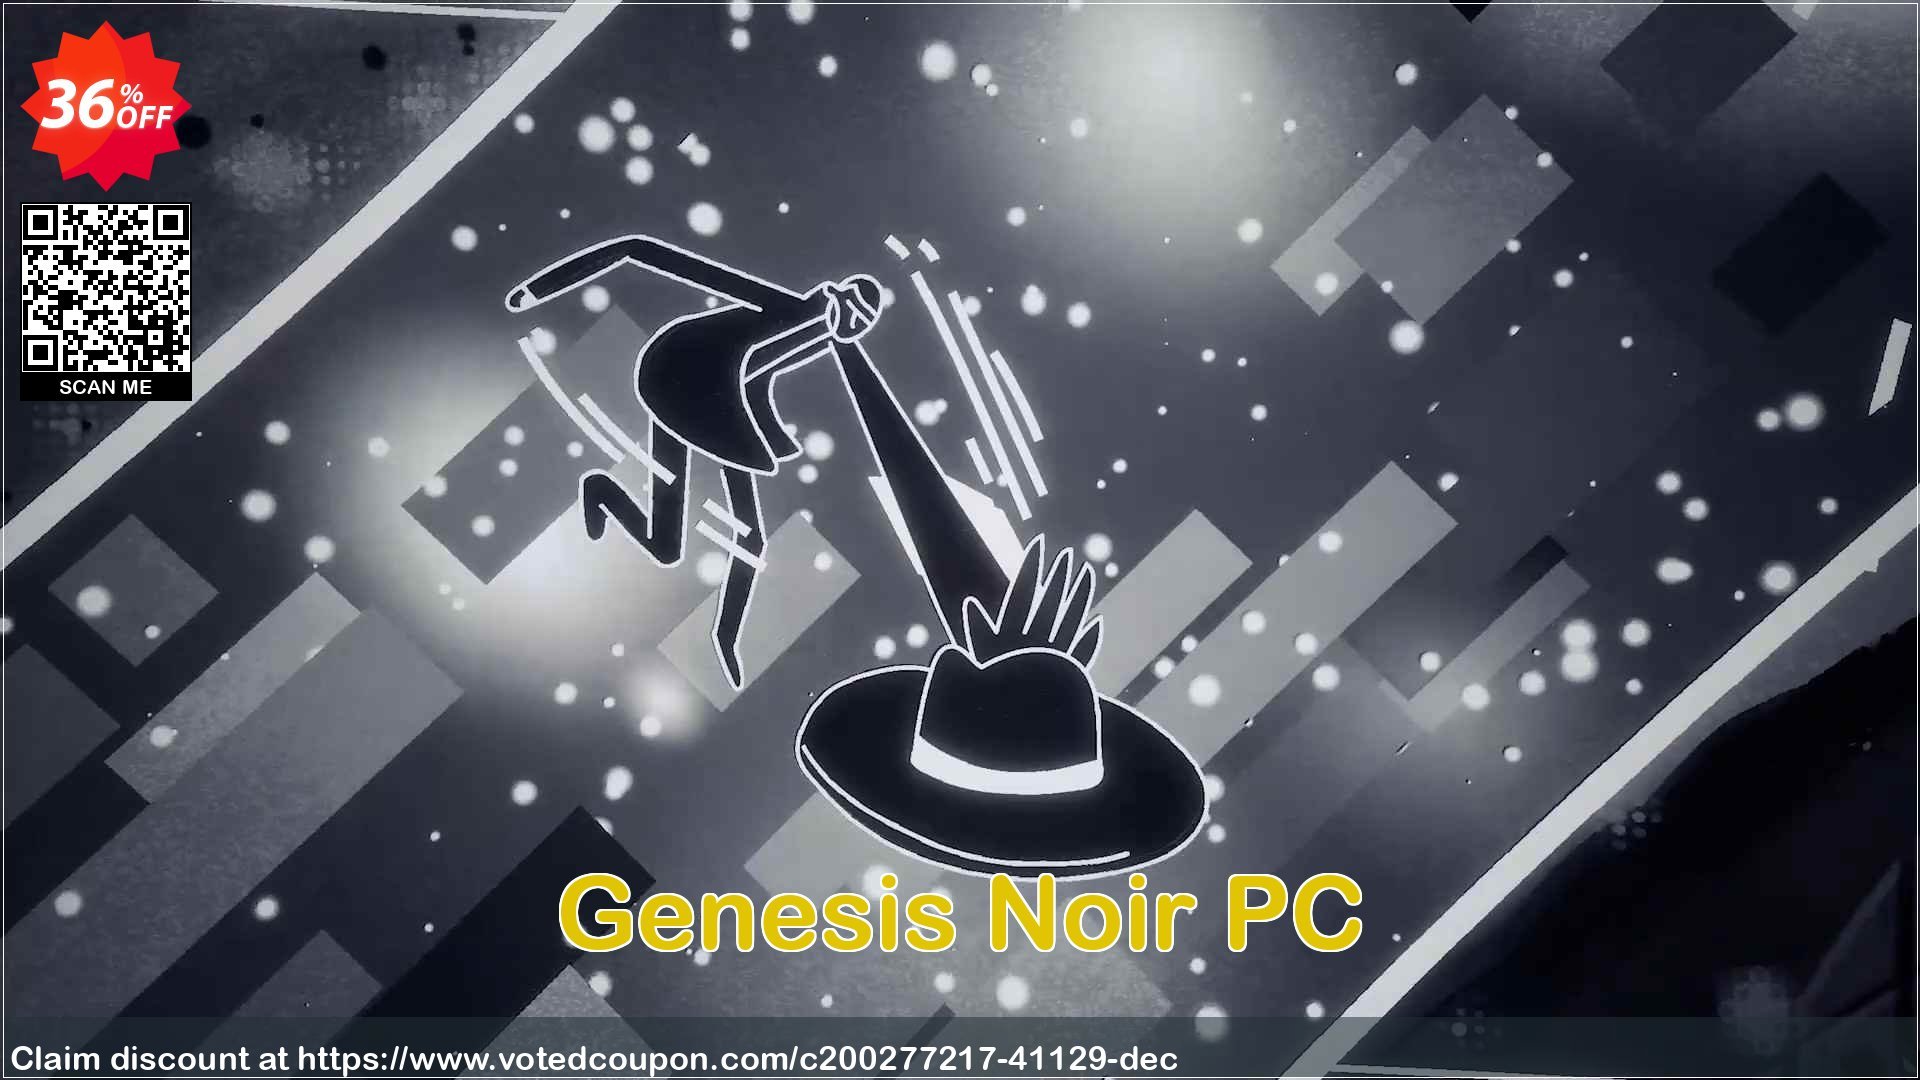 Genesis Noir PC Coupon Code May 2024, 36% OFF - VotedCoupon